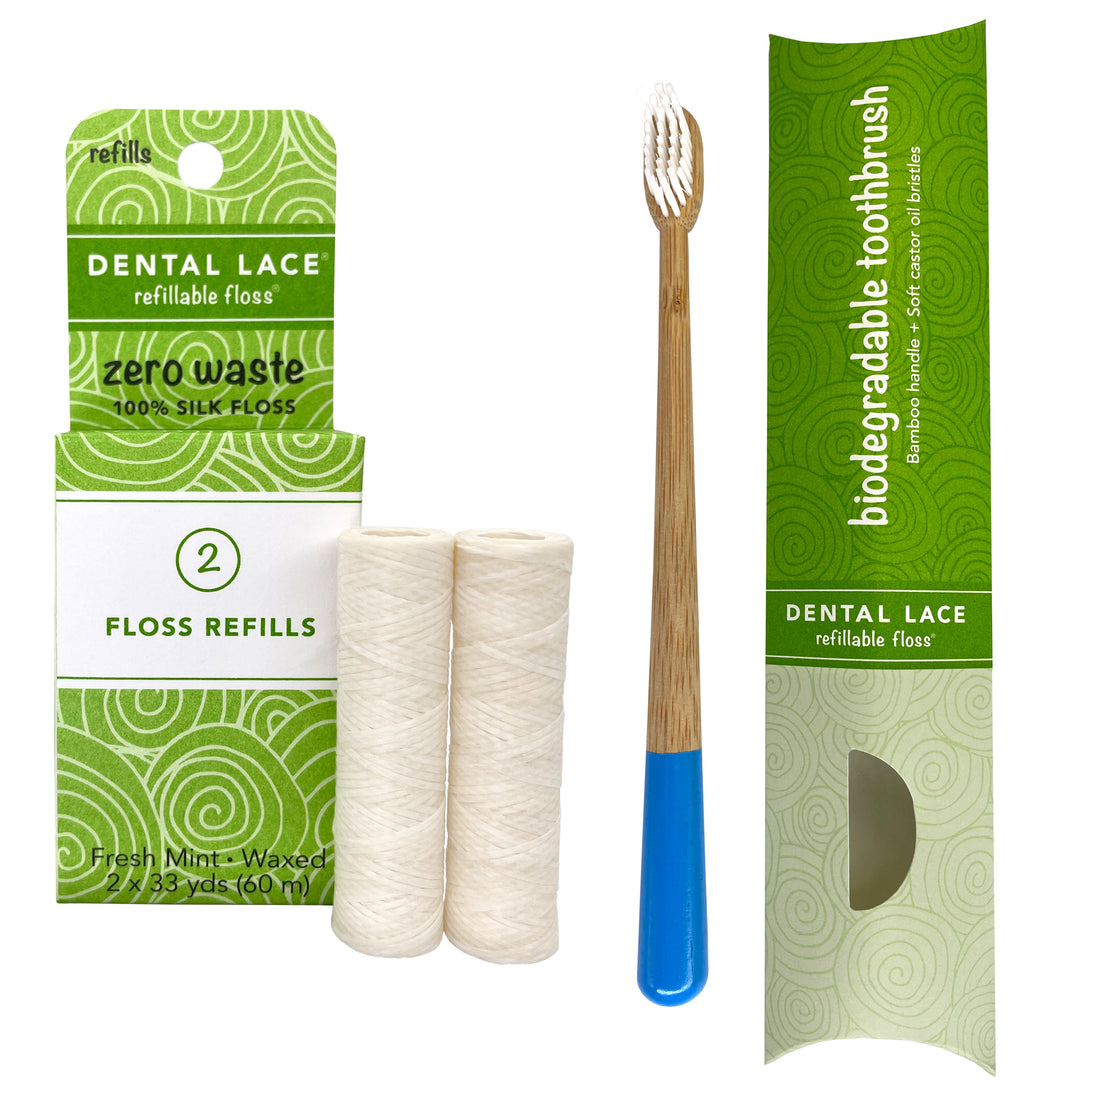 Dental Lace Silk Refill and Toothbrush Bundle